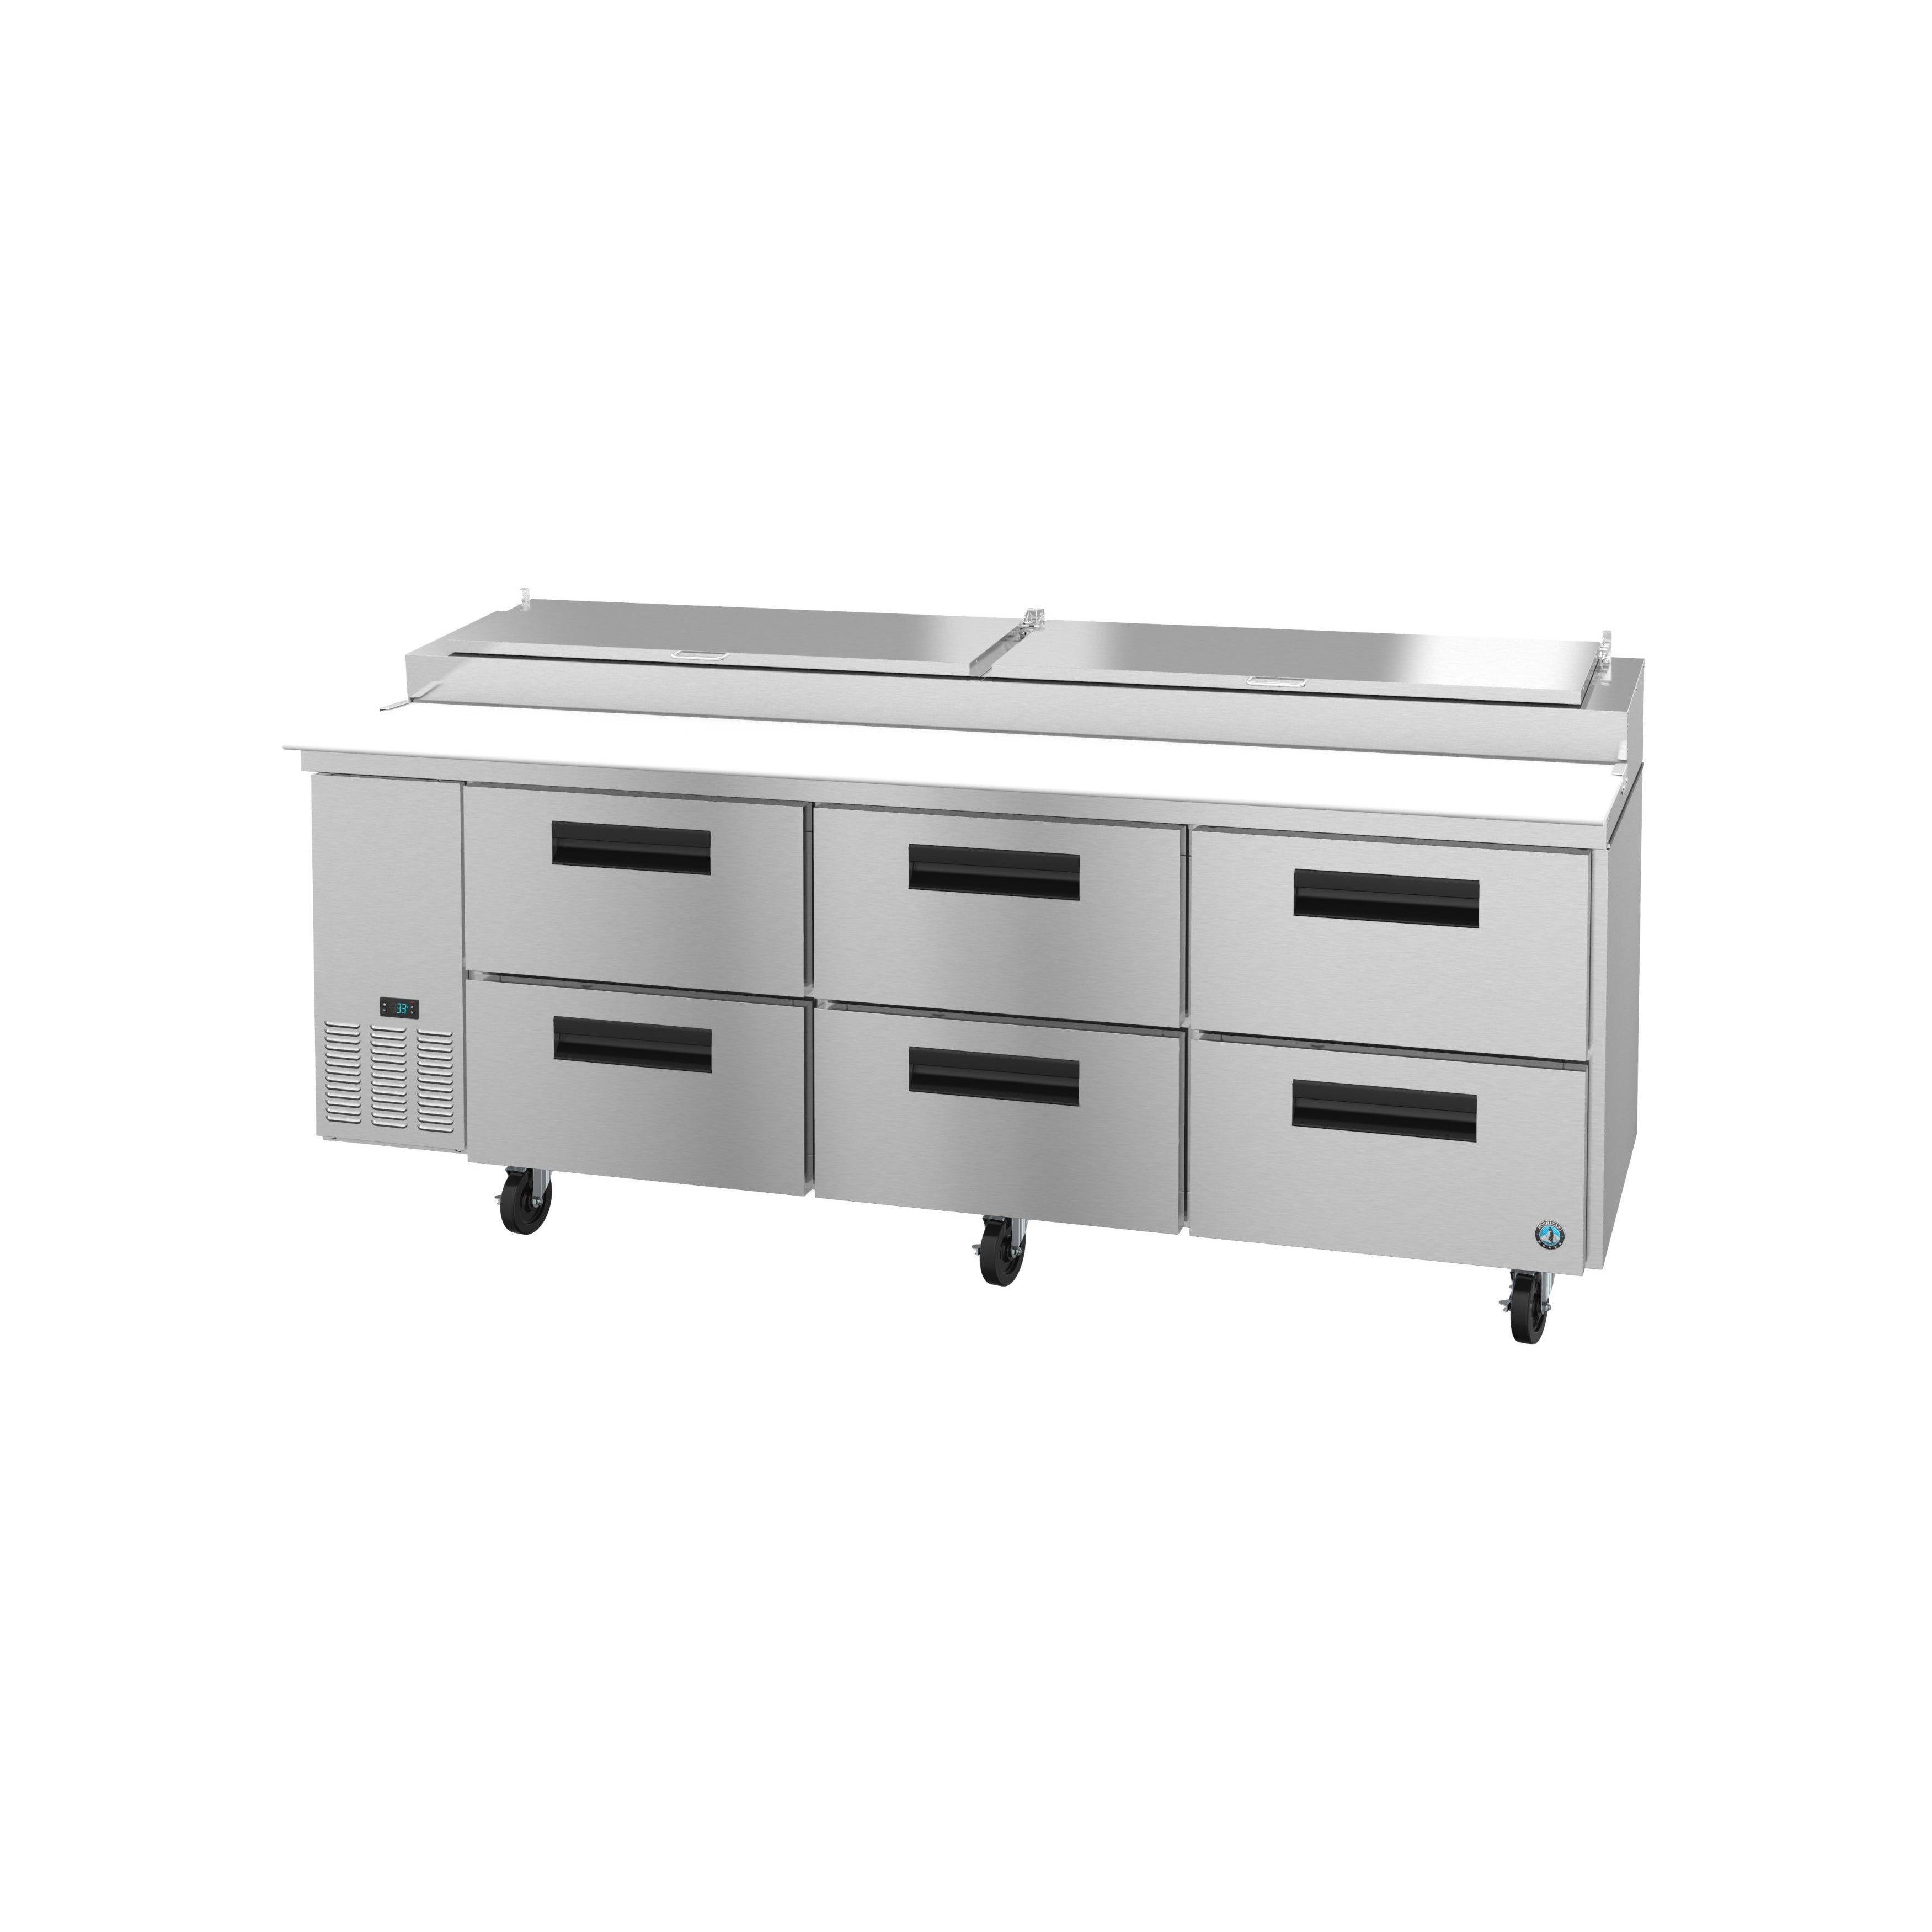 Hoshizaki - PR60B-D4, Commercial 60" Two Section Pizza Prep Table Refrigerator Stainless Drawers 16.63ct.ft.